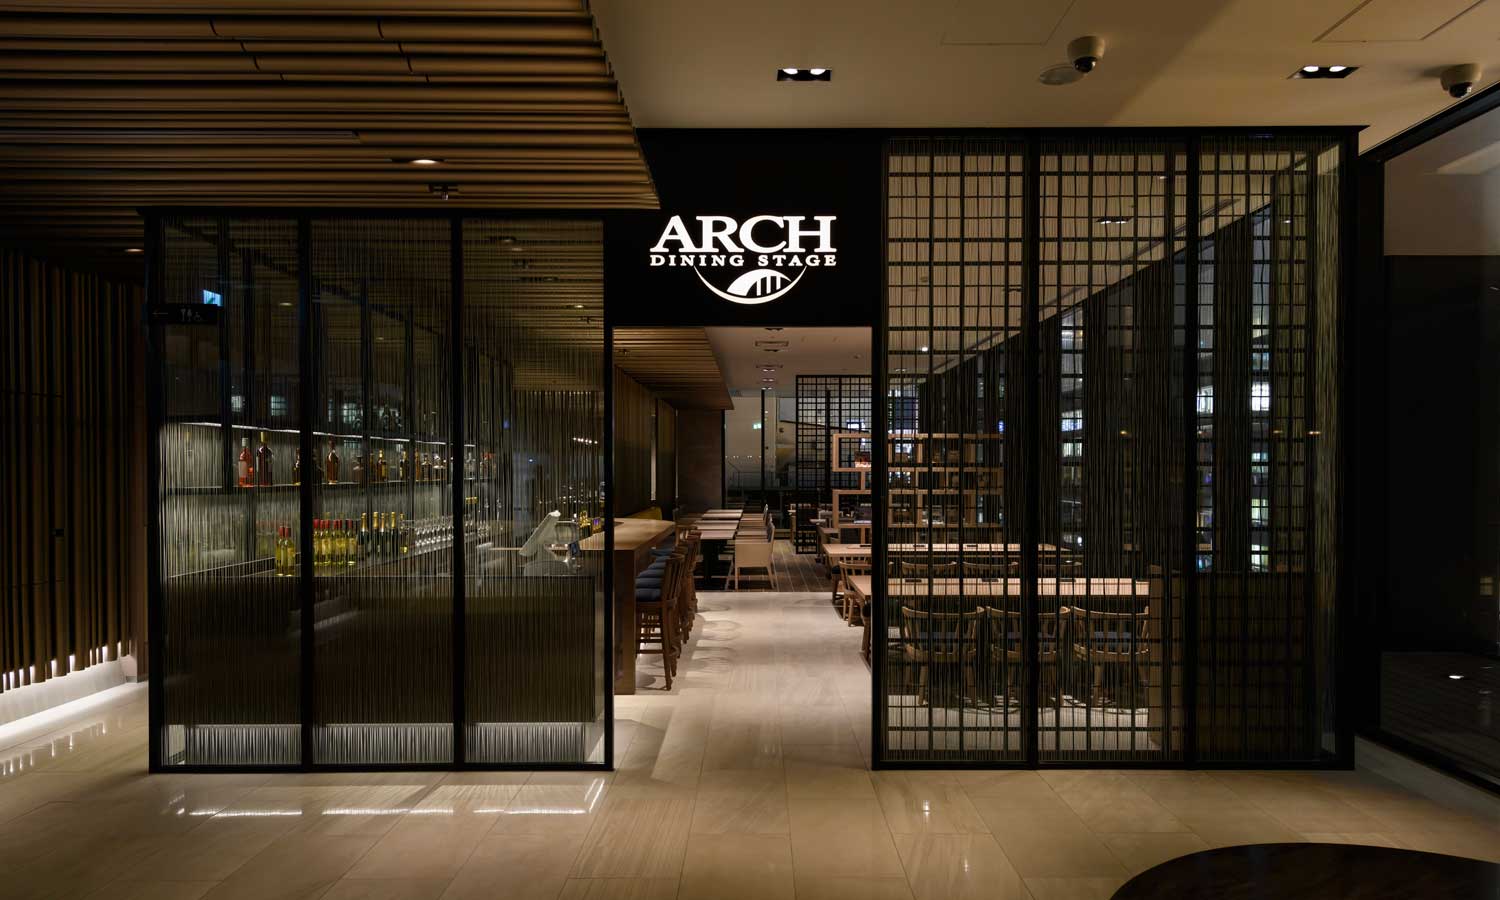 DINING STAGE ARCH | remm Tokyo Kyobashi